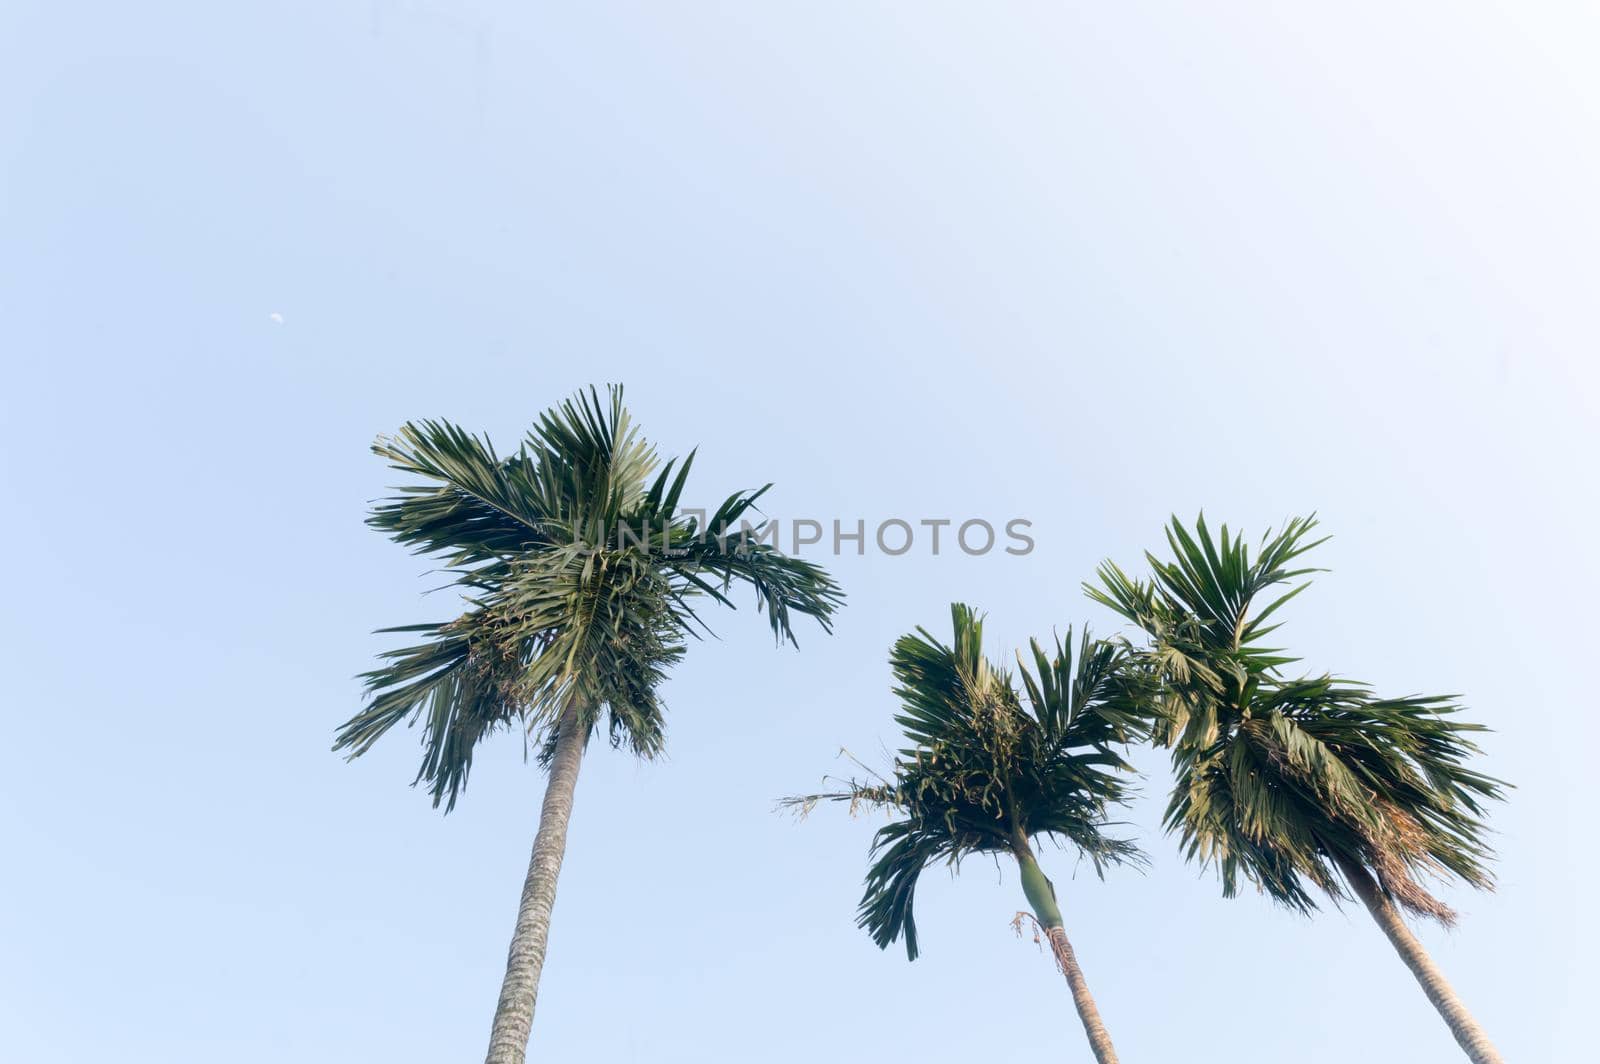 The Areca palm tree (Areca nut) against vibrant blue color sunset sky in summer illuminated by sunlight. Low angel View. Beauty in nature seasonal theme Background image. Kolkata India. by sudiptabhowmick